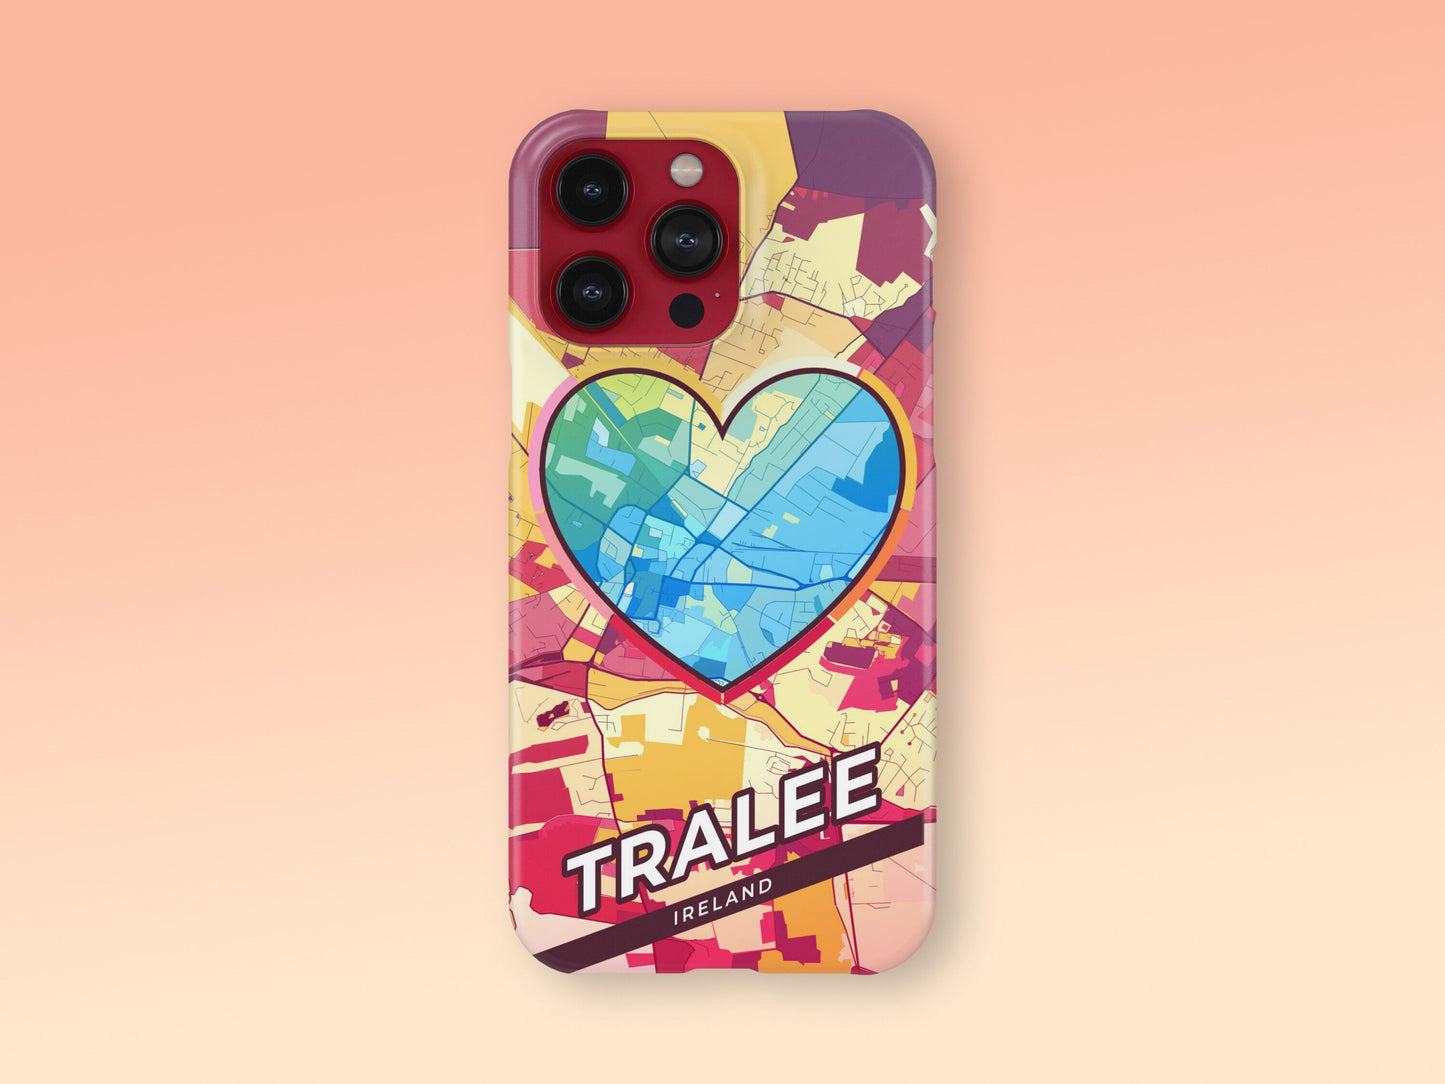 Tralee Ireland slim phone case with colorful icon 2